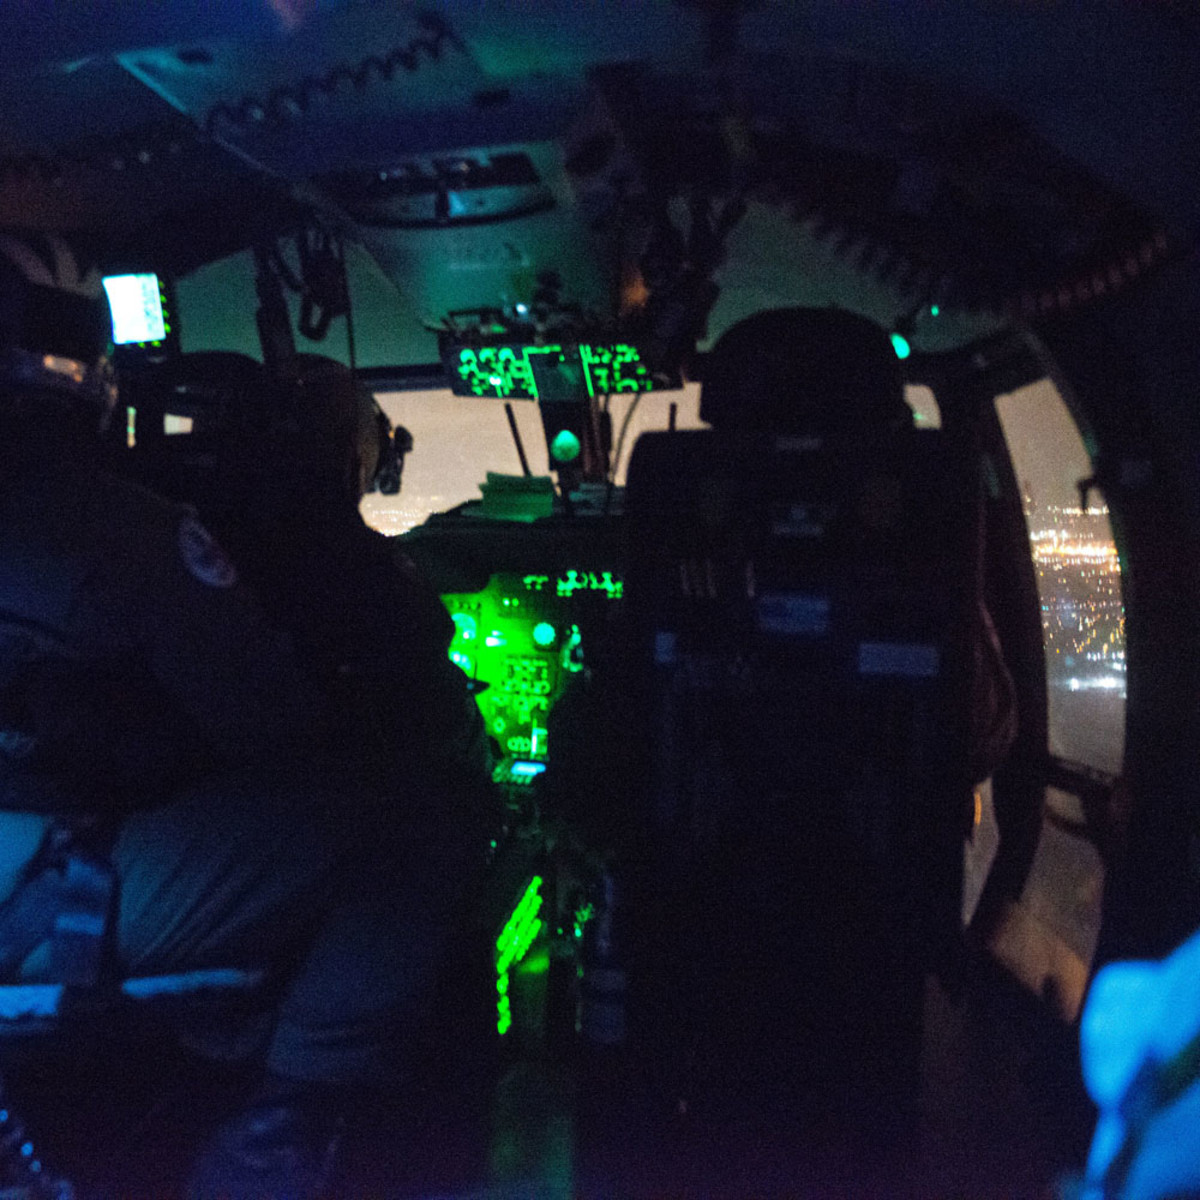 USCG helicopter conducing night operations.